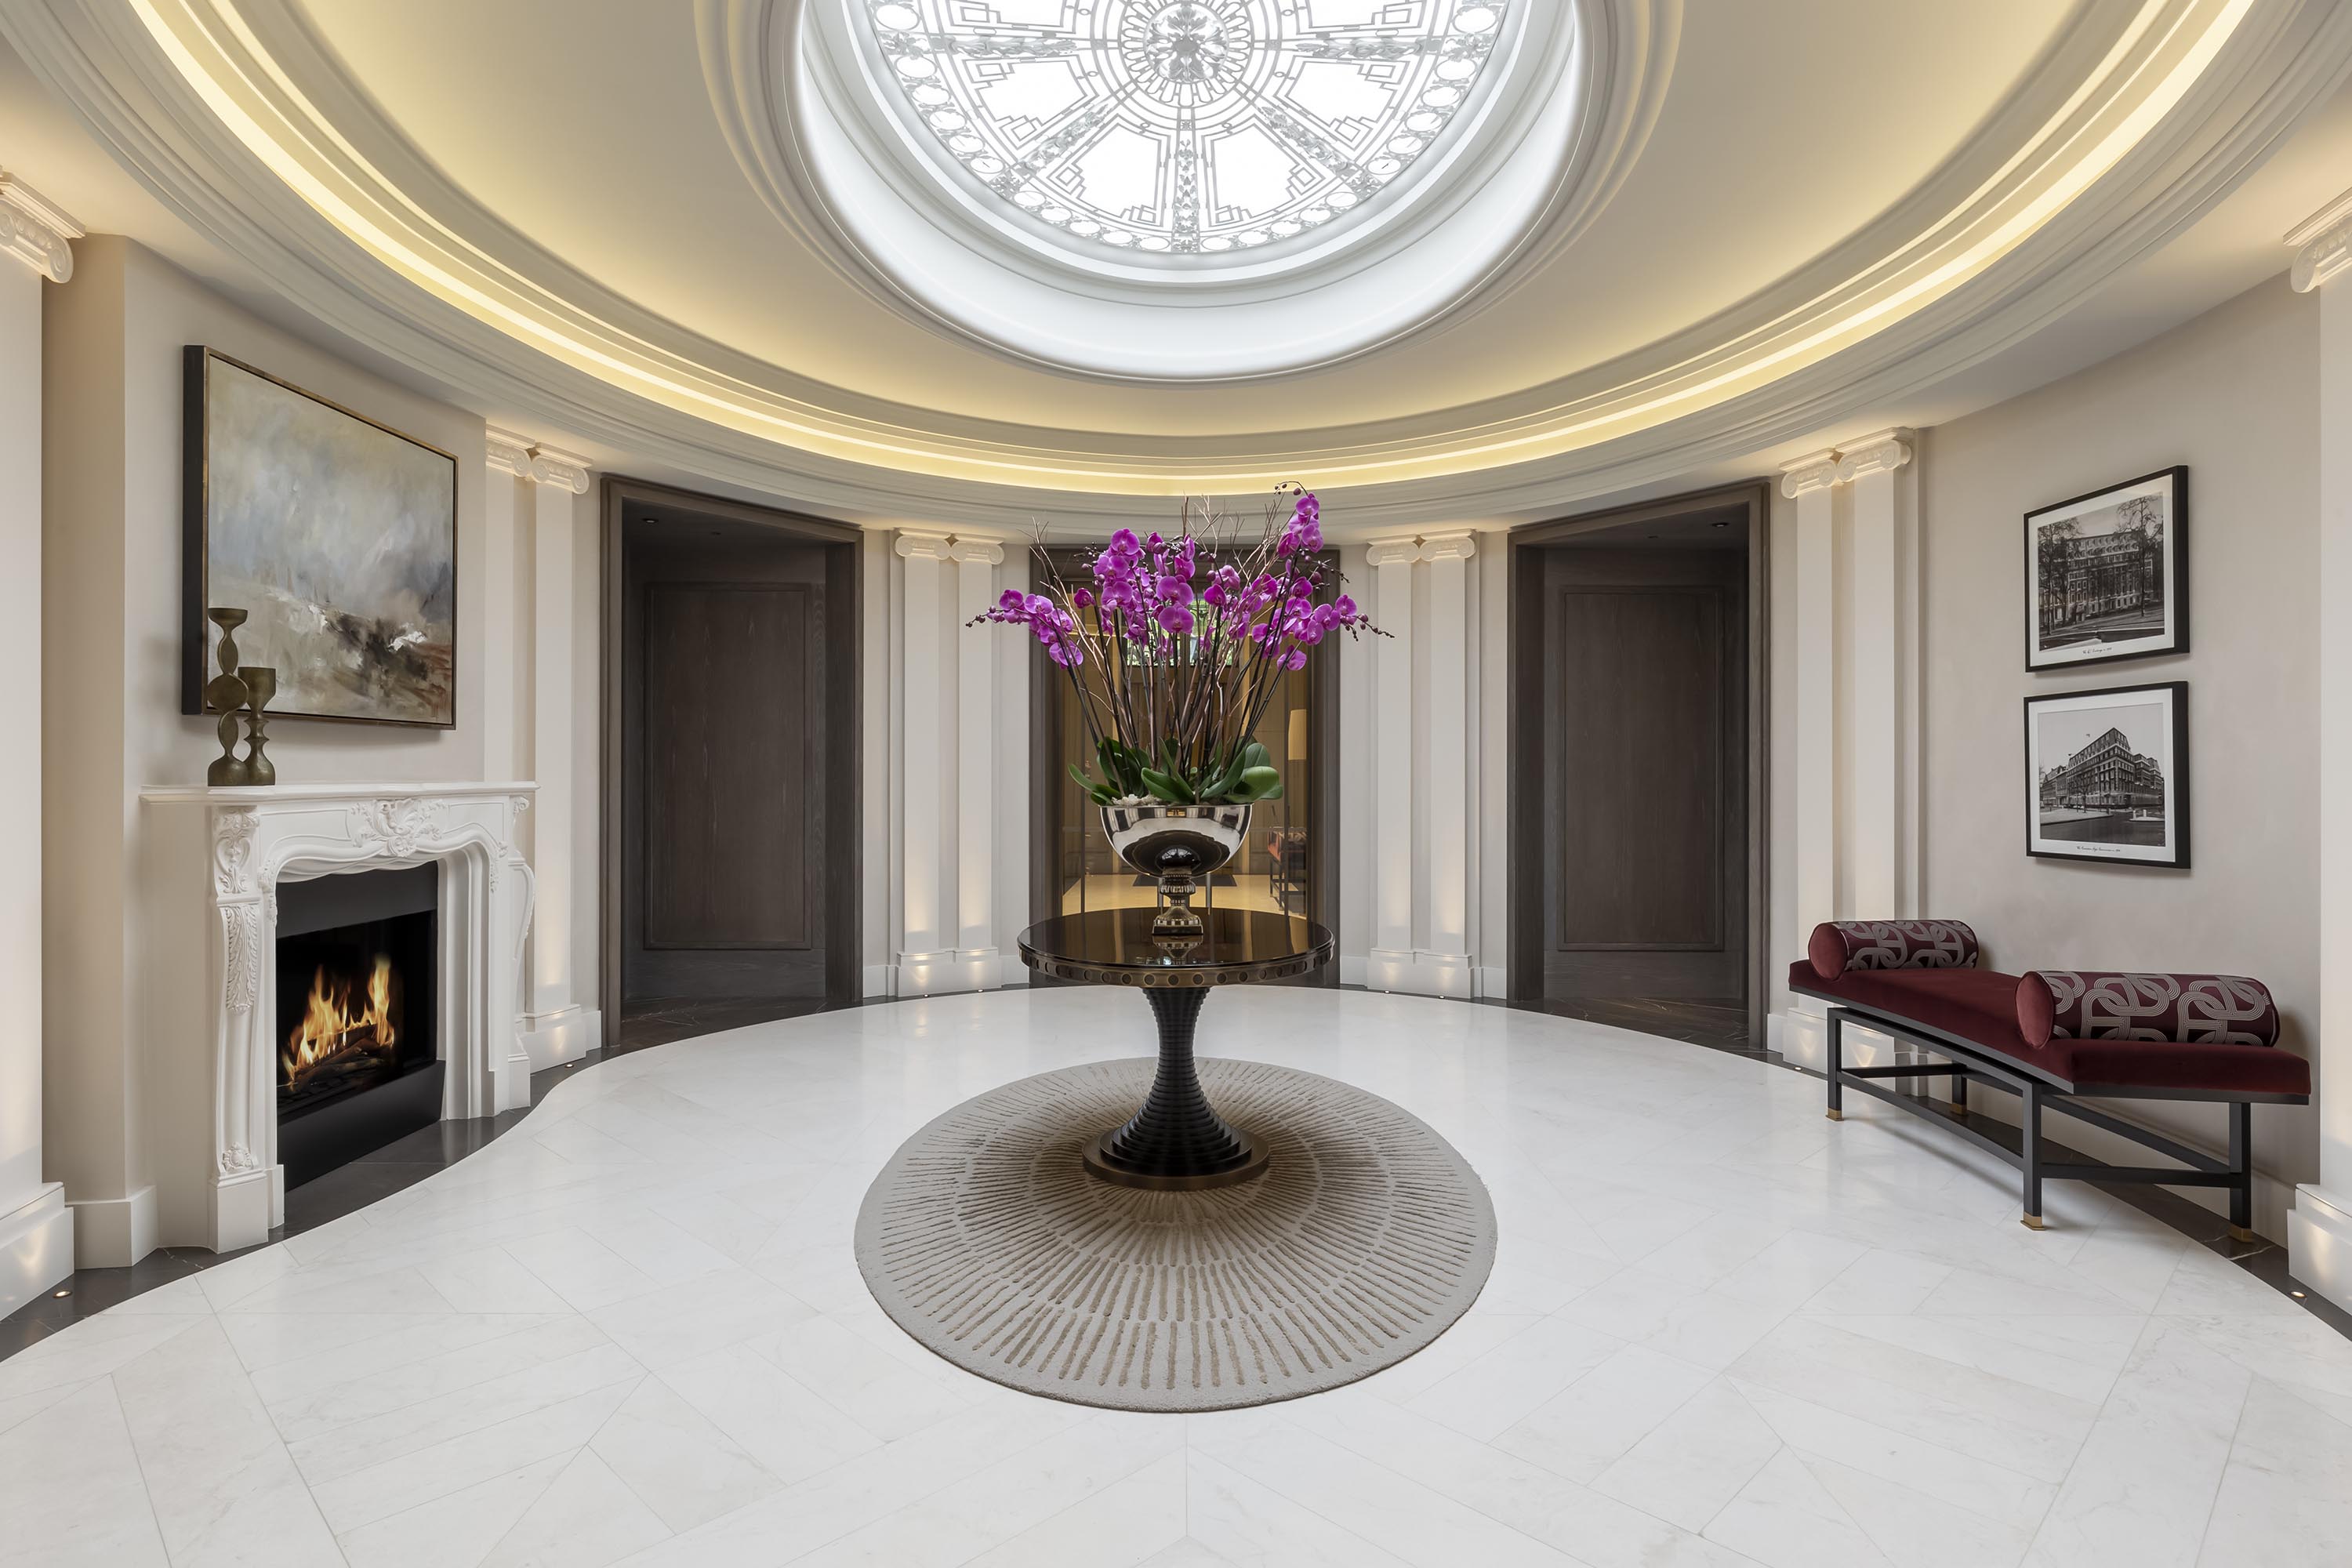 A London penthouse with access to an Oval Office just sold for $181 million  - CNN Style